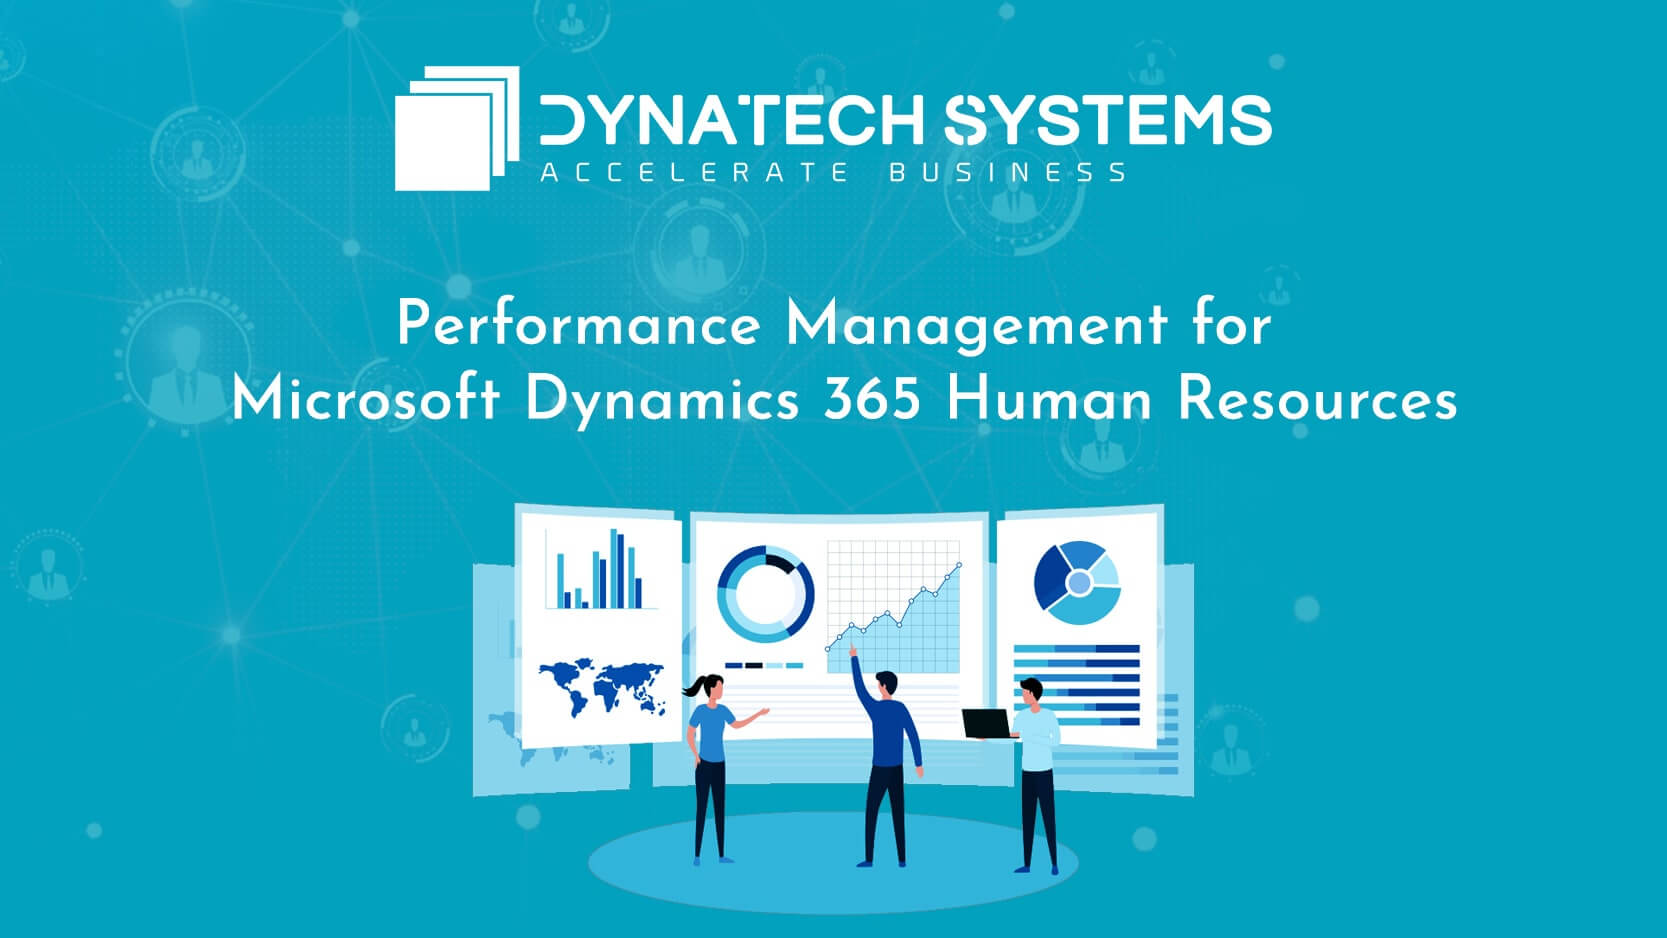 Performance Management for Microsoft Dynamics 365 Human Resources